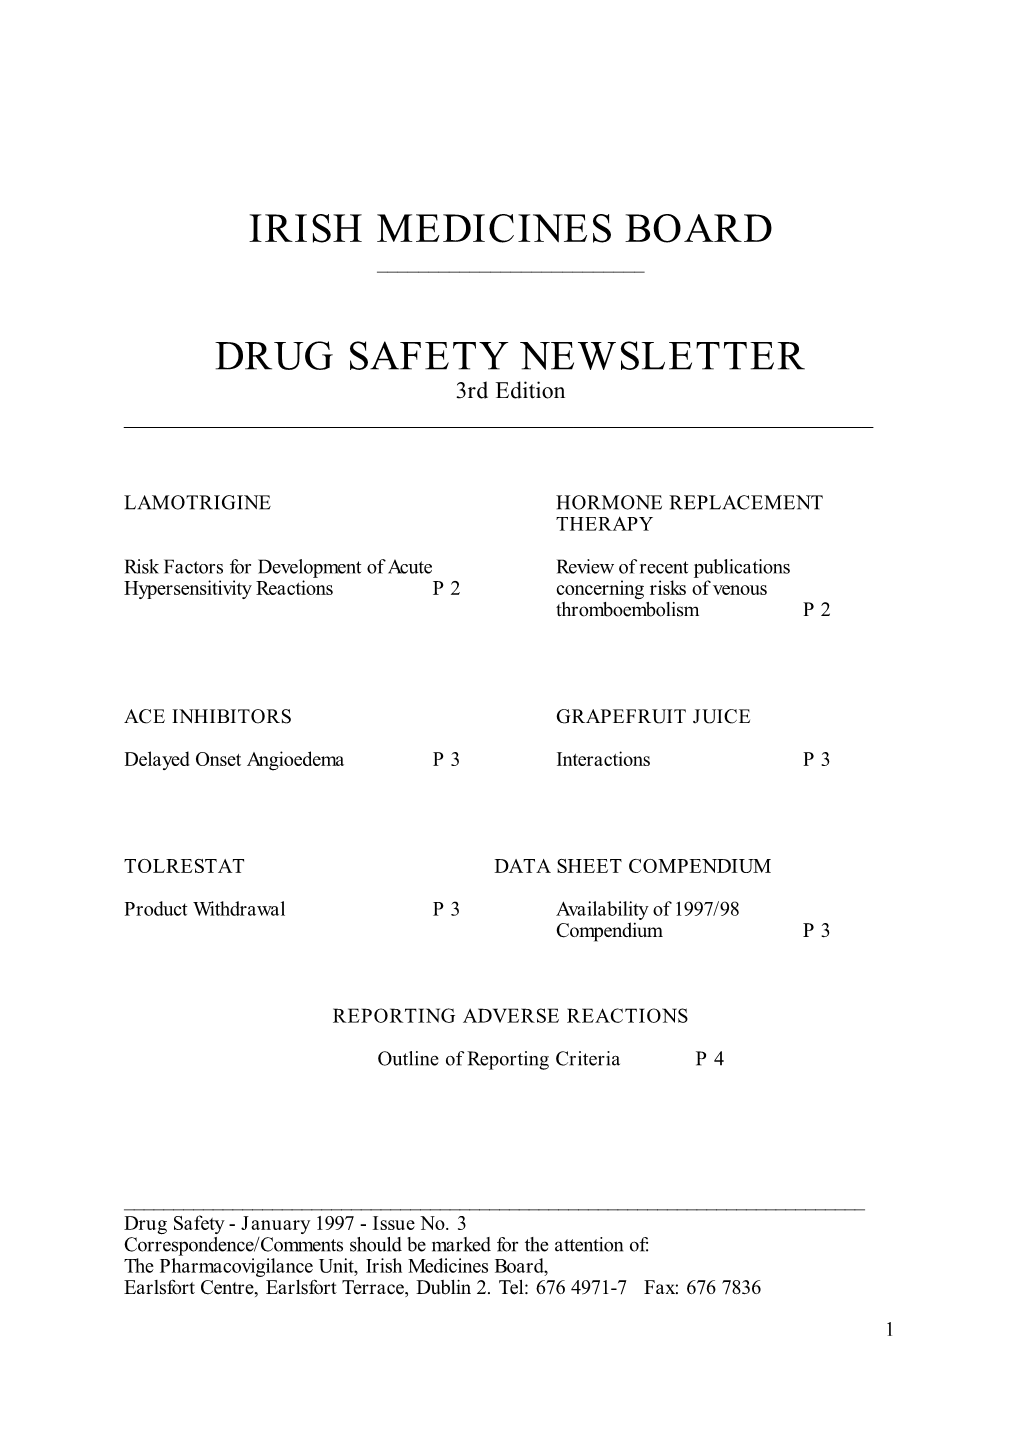 Drug Safety Newsletter-Issue No. 3-January 1997